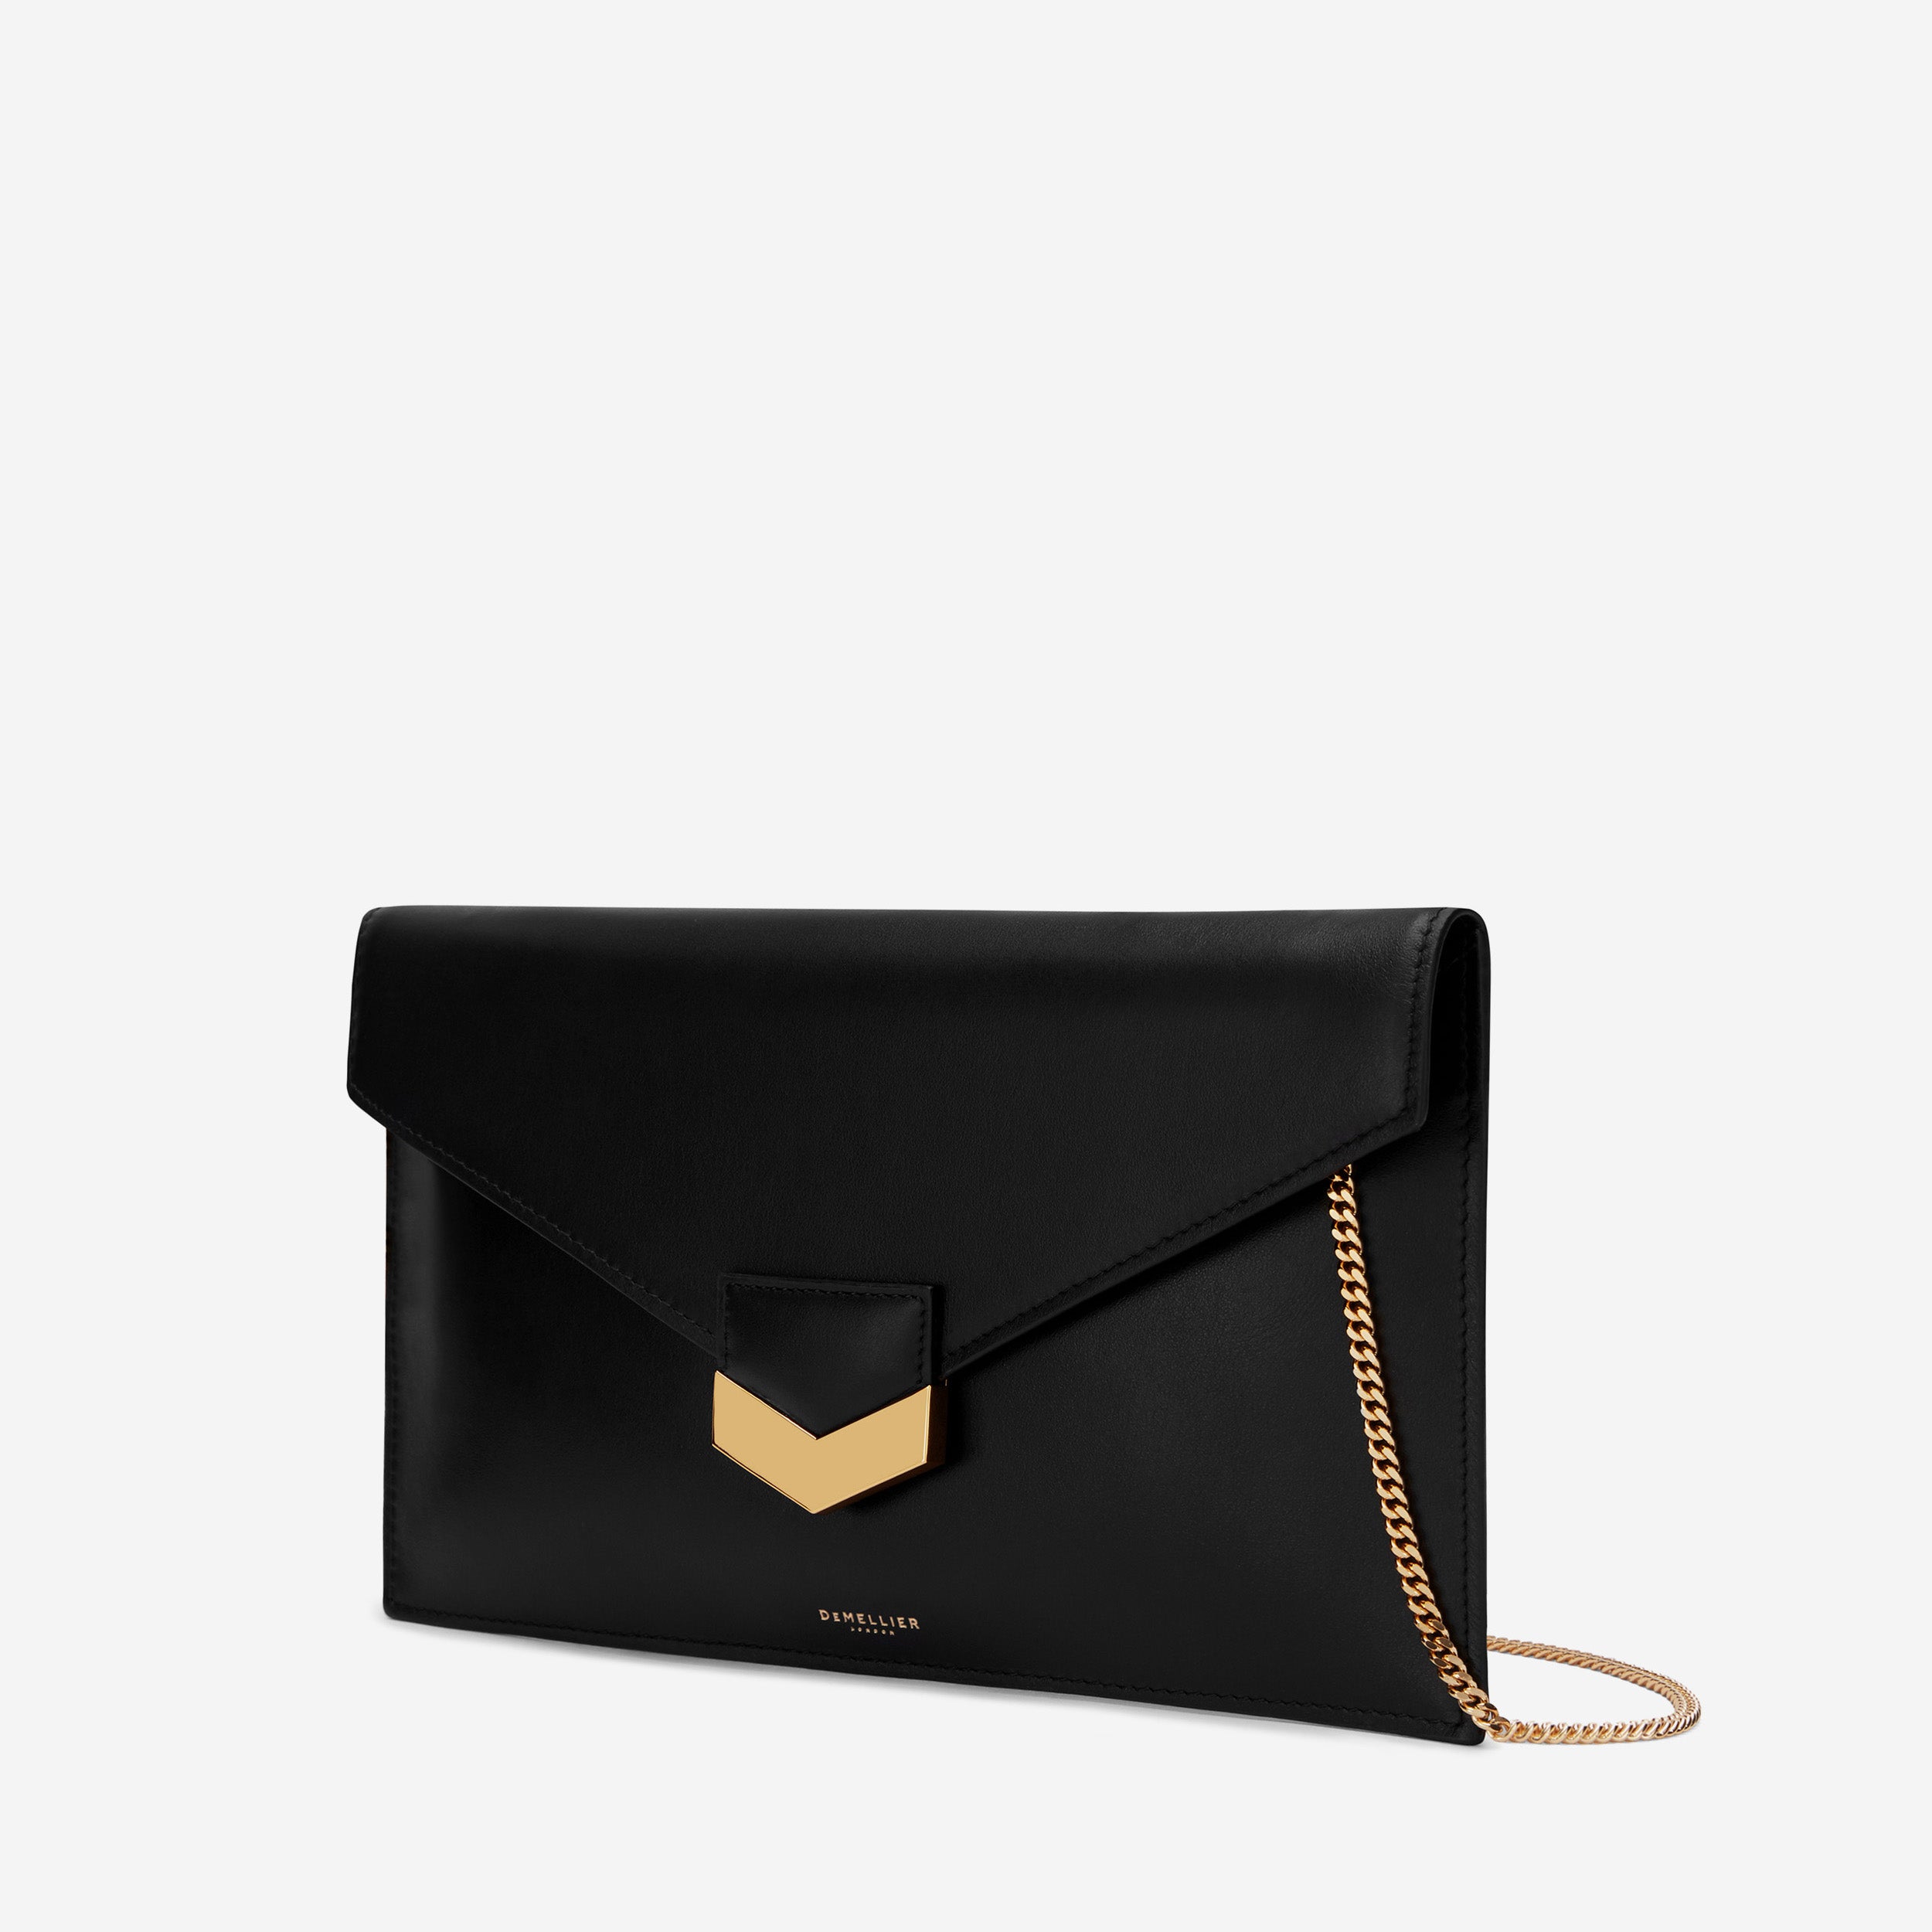 Black leather envelope clutch bag with shoulder strap - Luce by Chiara Negri